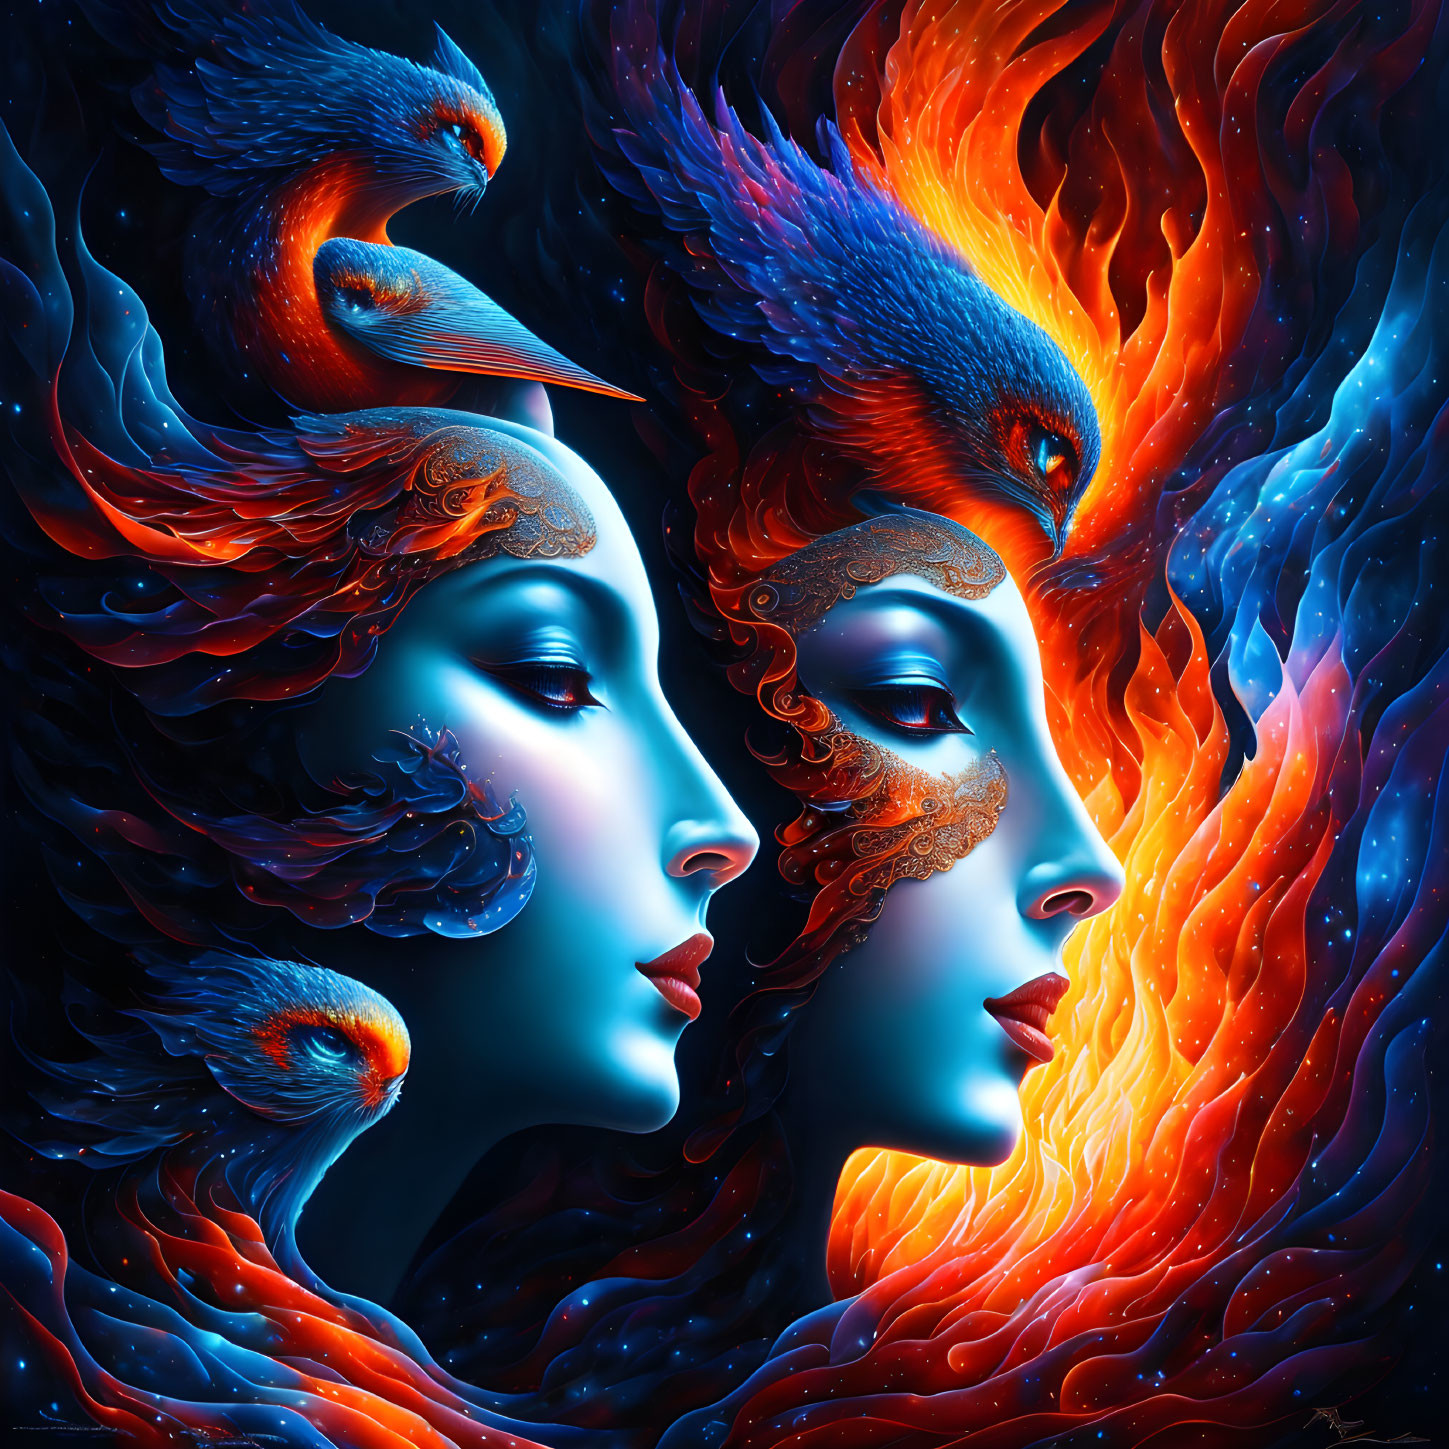 Digital artwork: Two faces in profile, one blue, one red, surrounded by flames and feathers